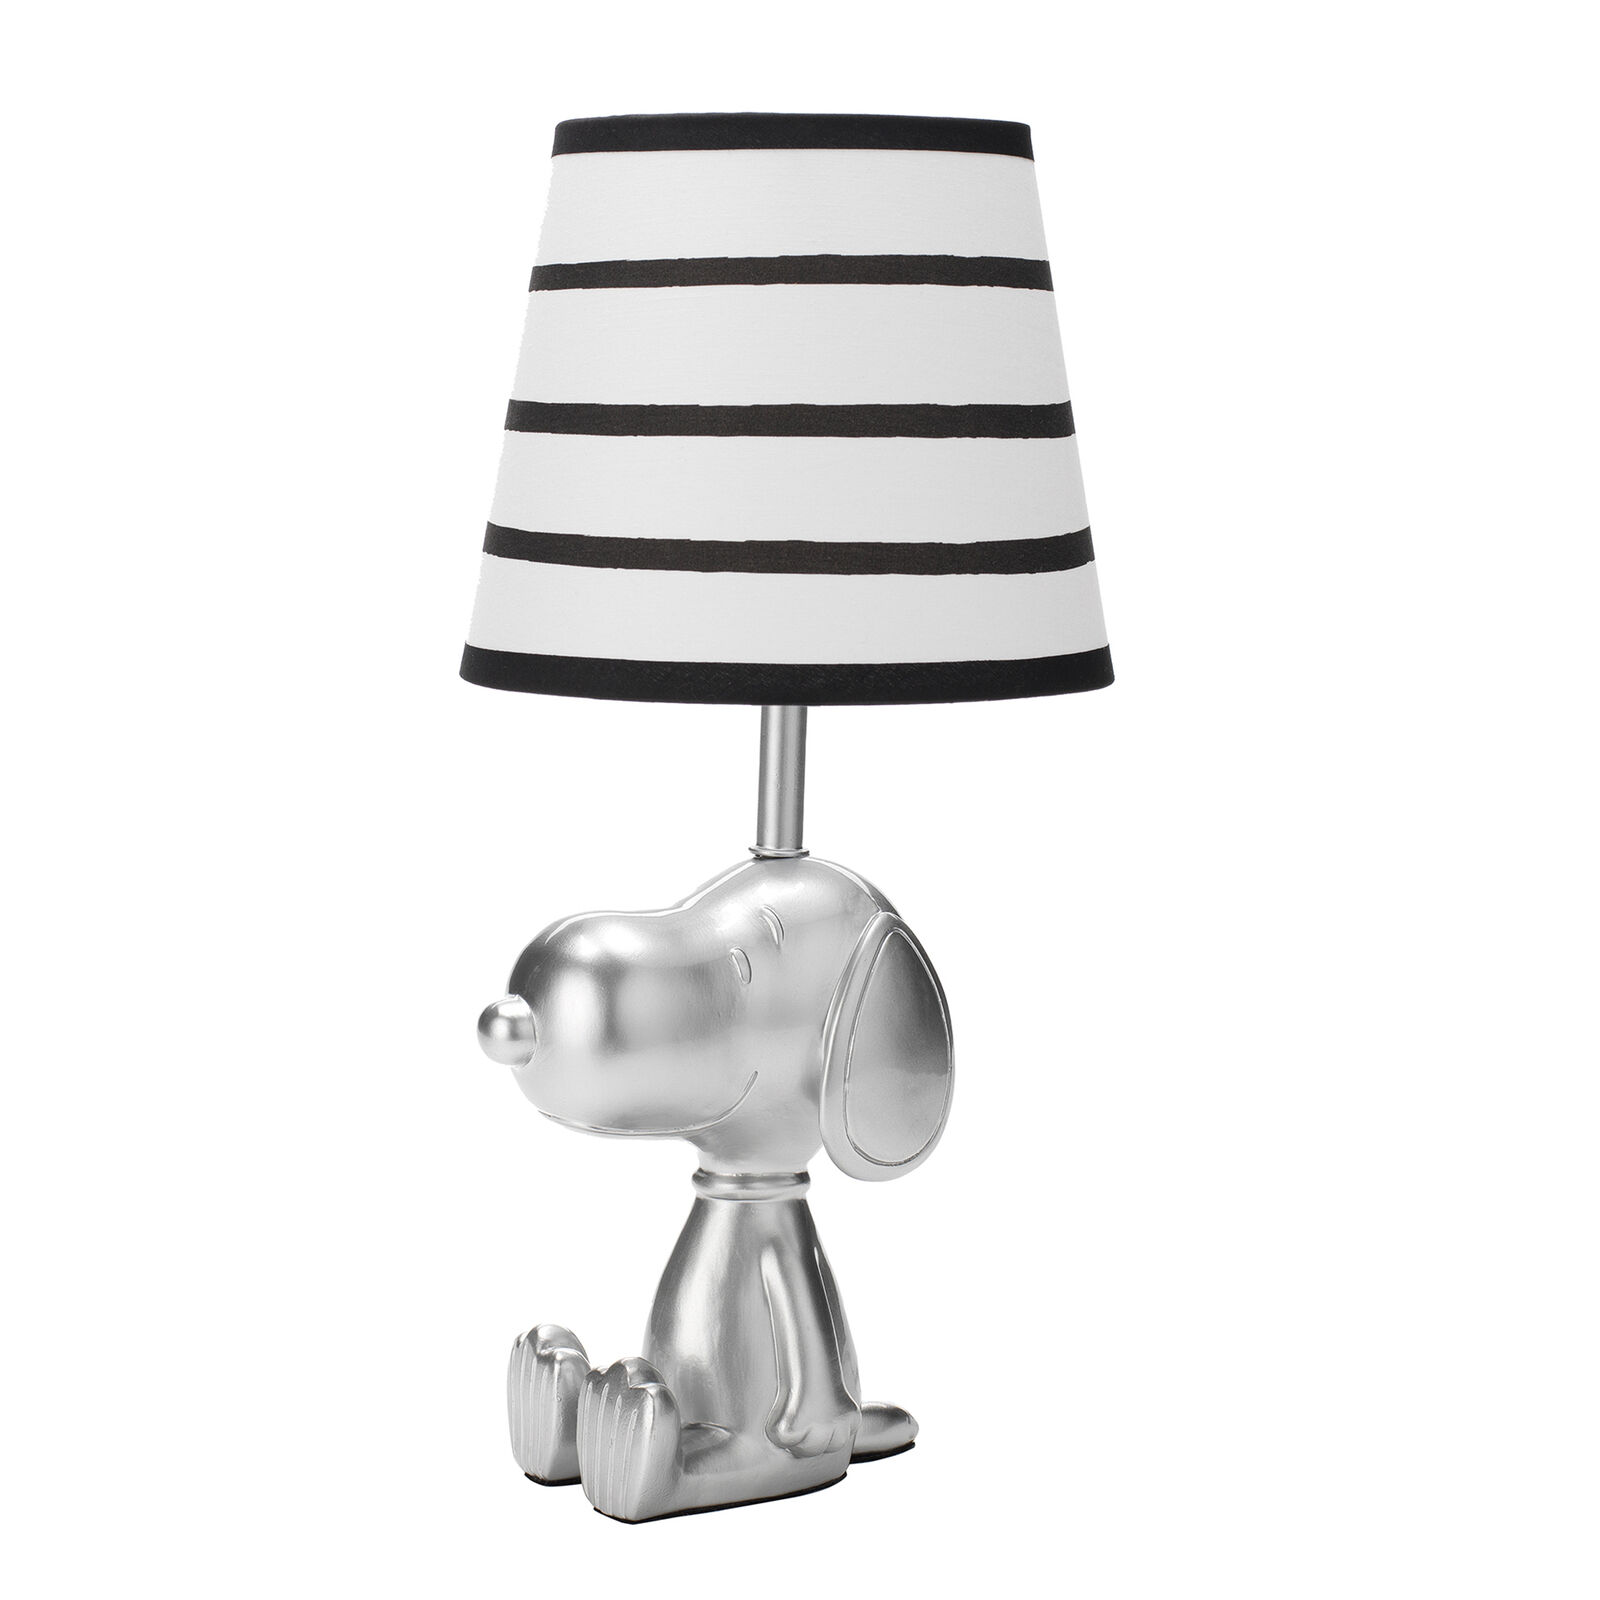 Lambs & Ivy Classic Snoopy Silver Lamp With Black/white Shade & Bulb